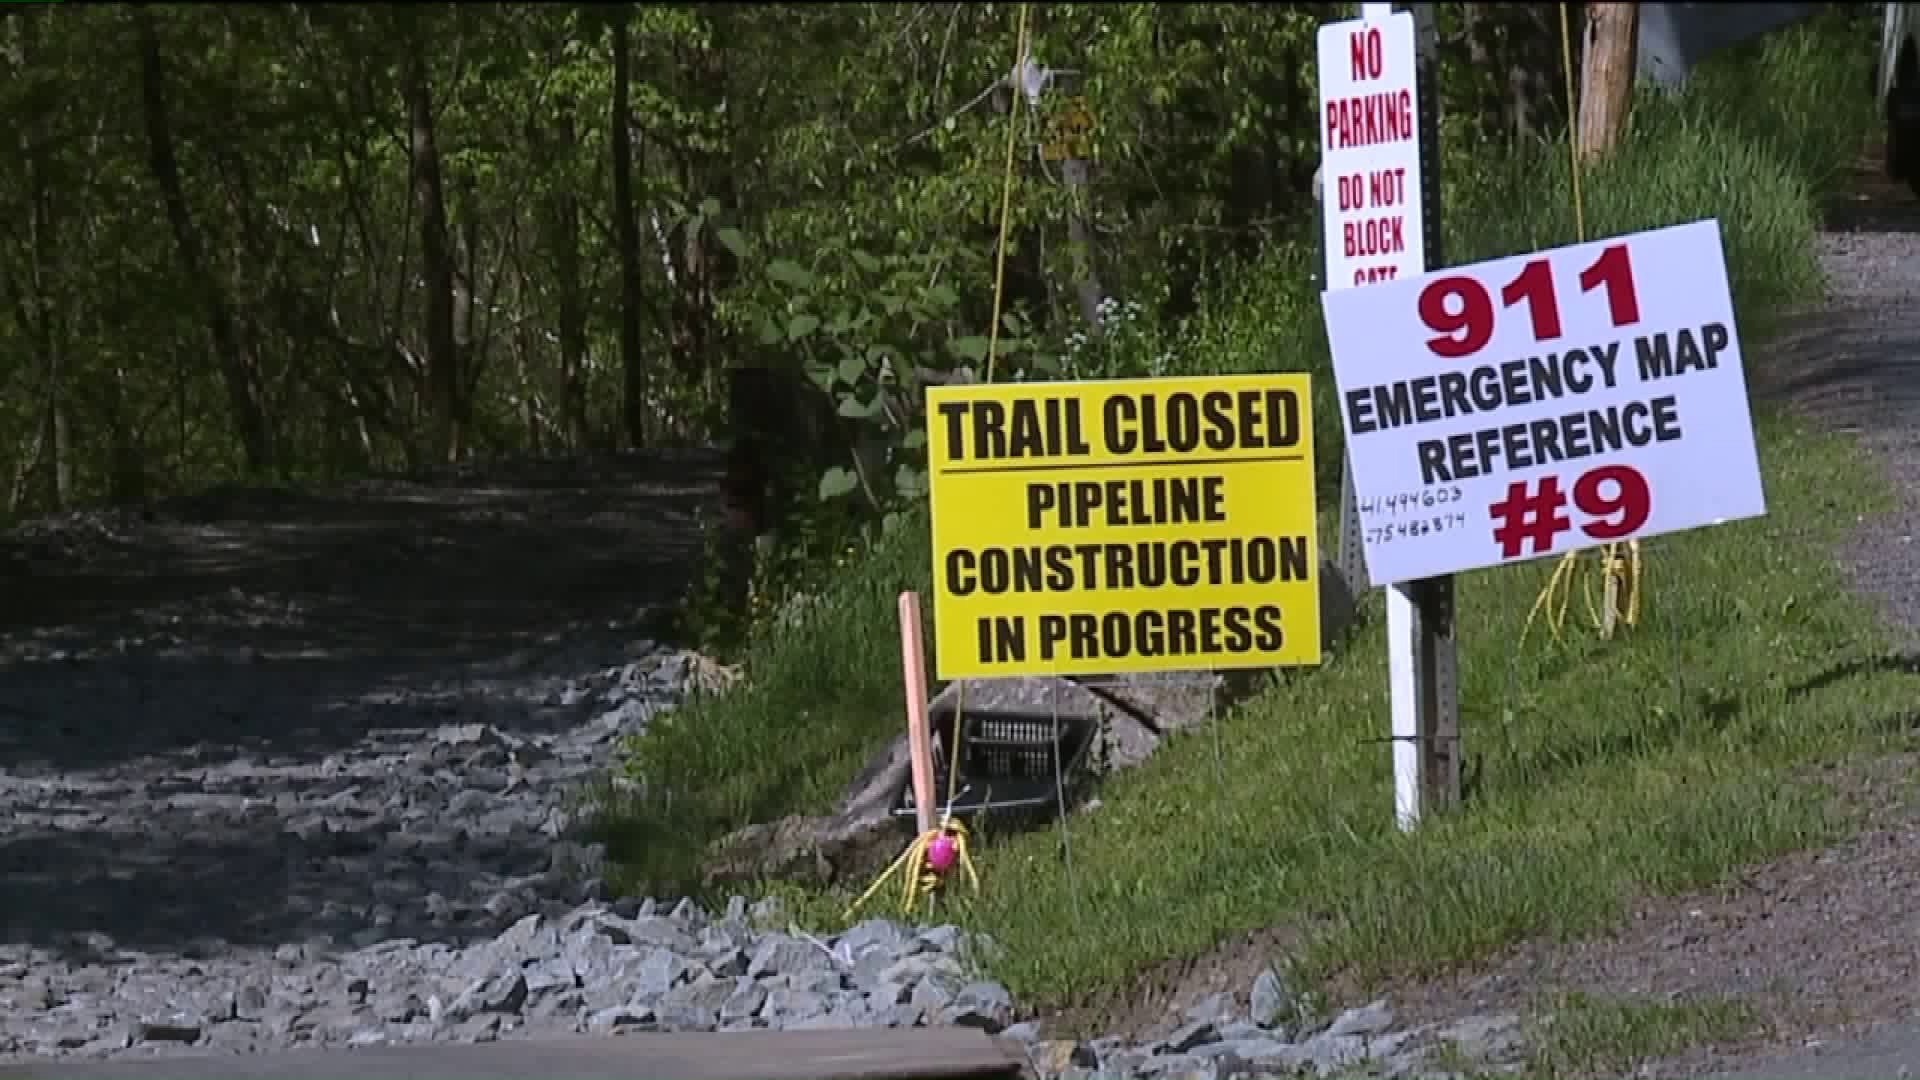 Trail Closure Spoils Plans for Many